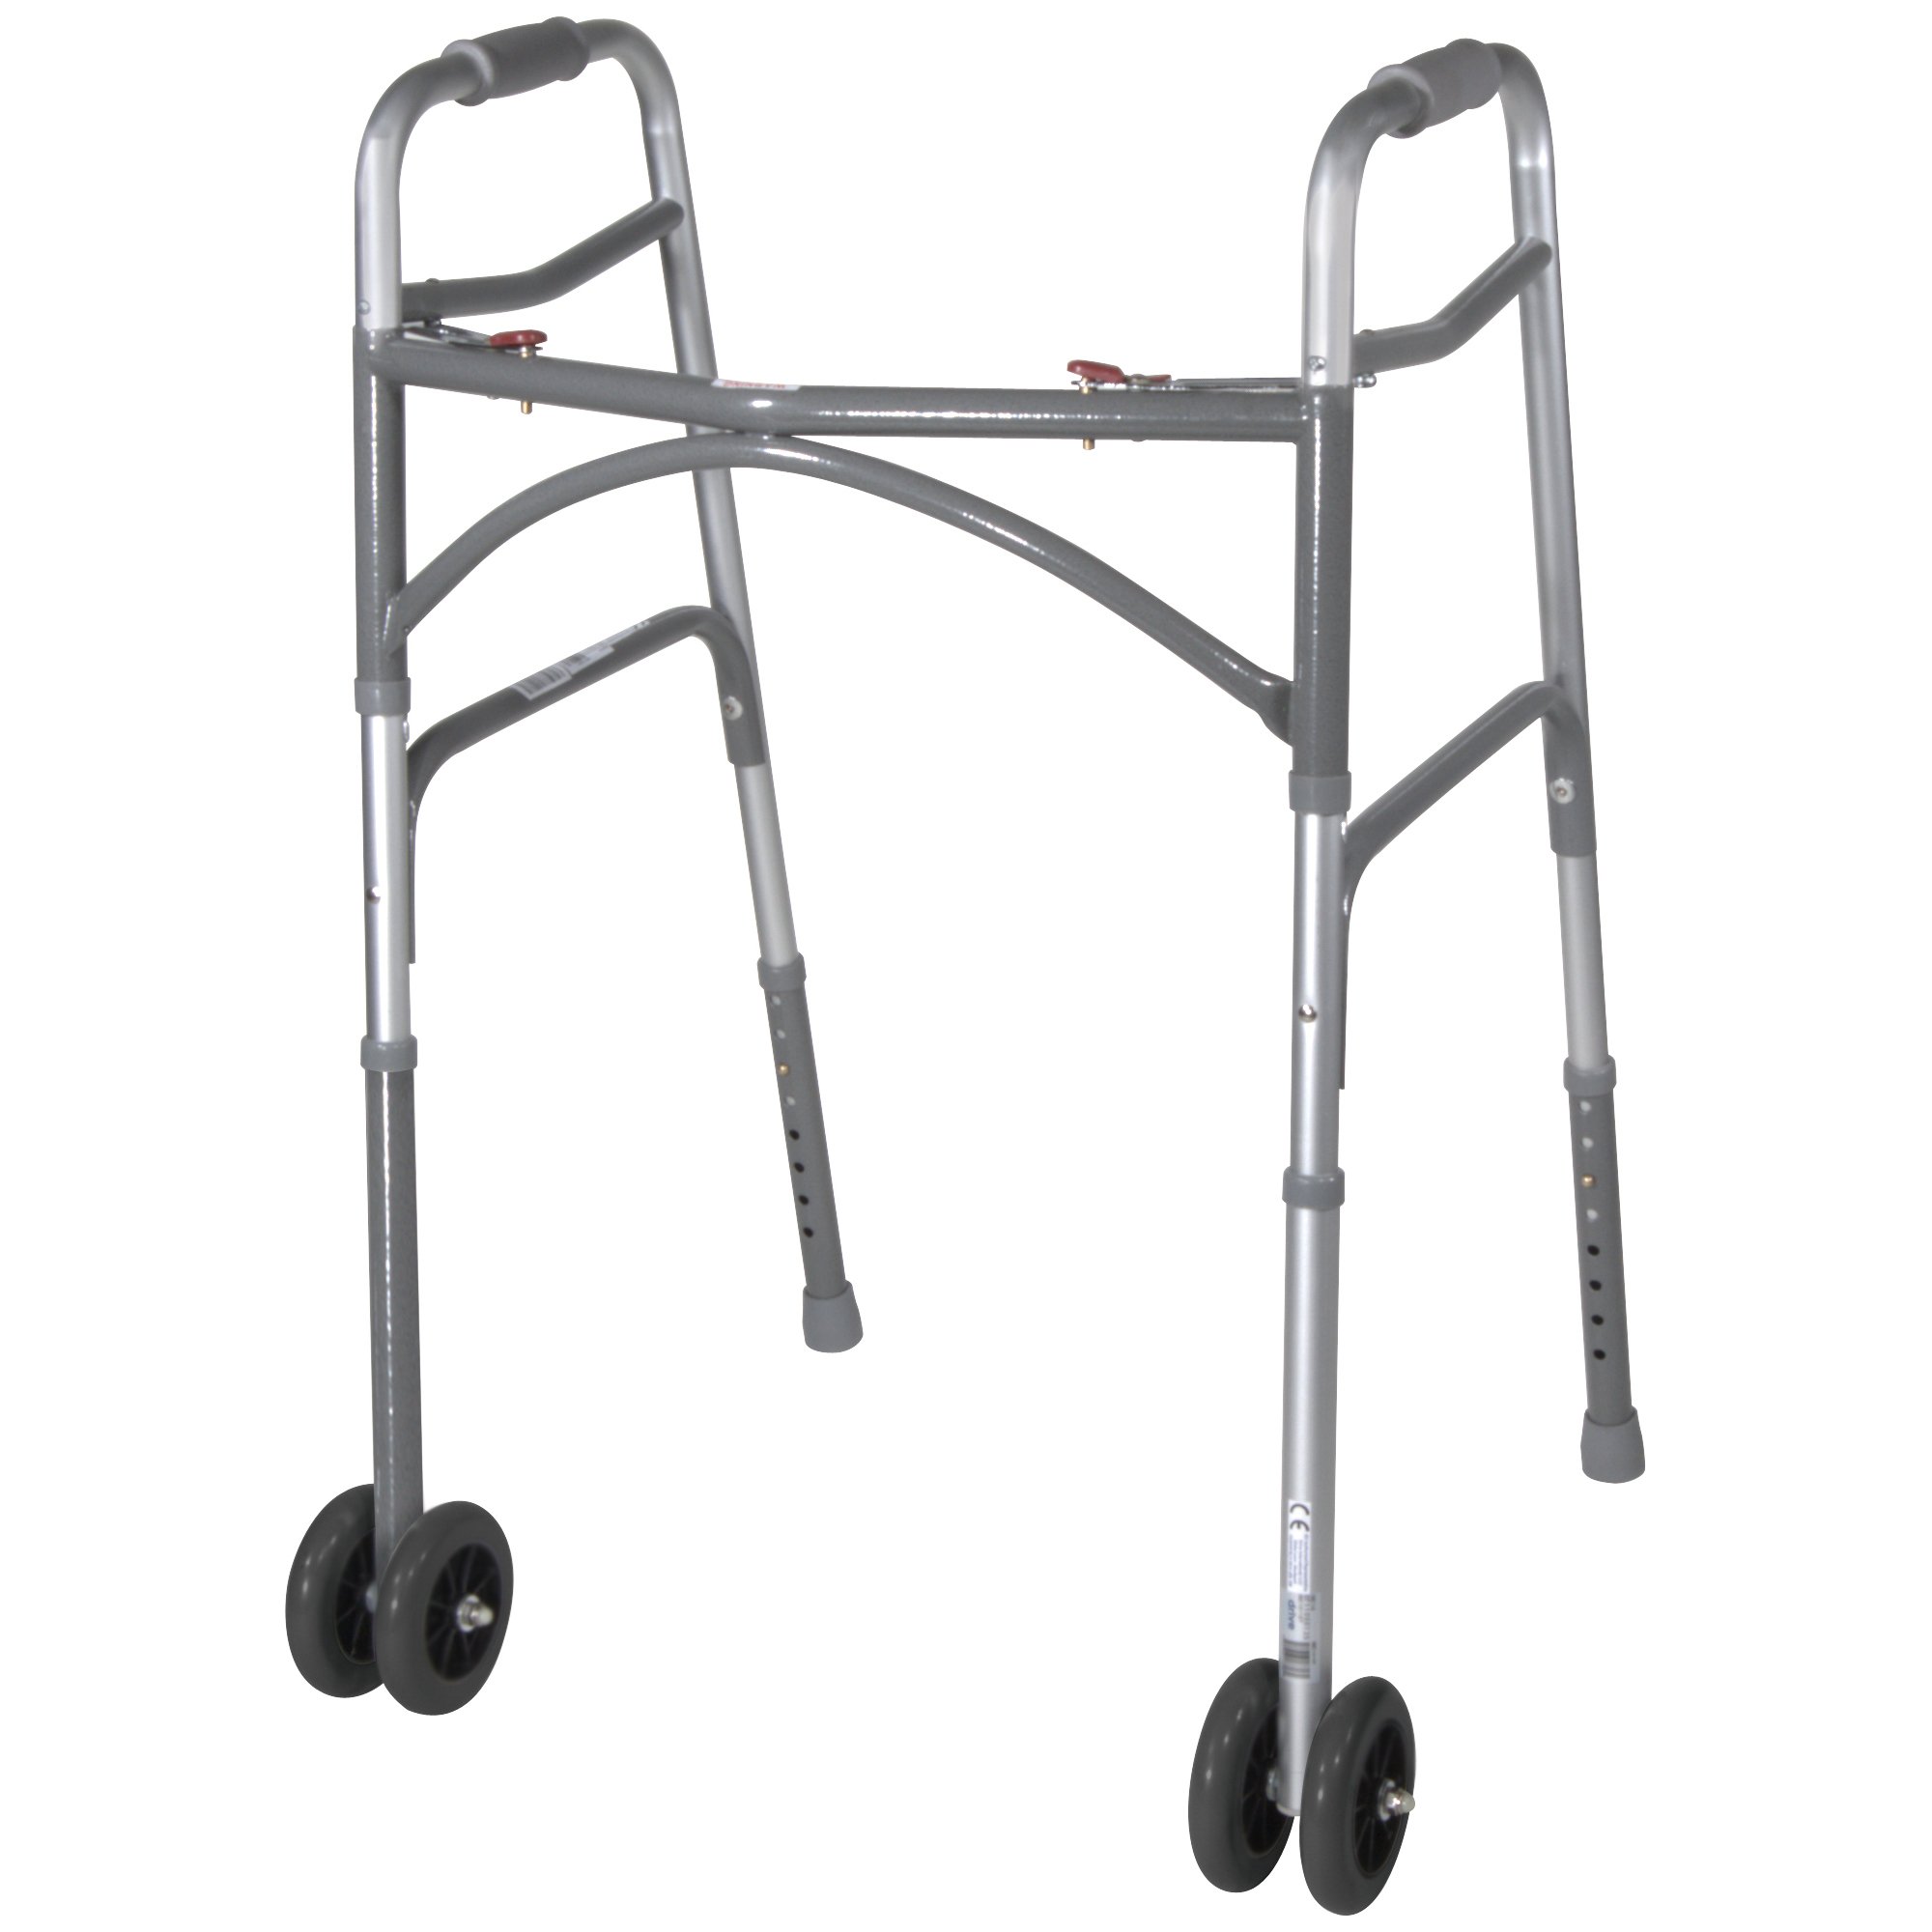 McKesson Bariatric Folding Walker 500 lbs. Weight Capacity, Silver